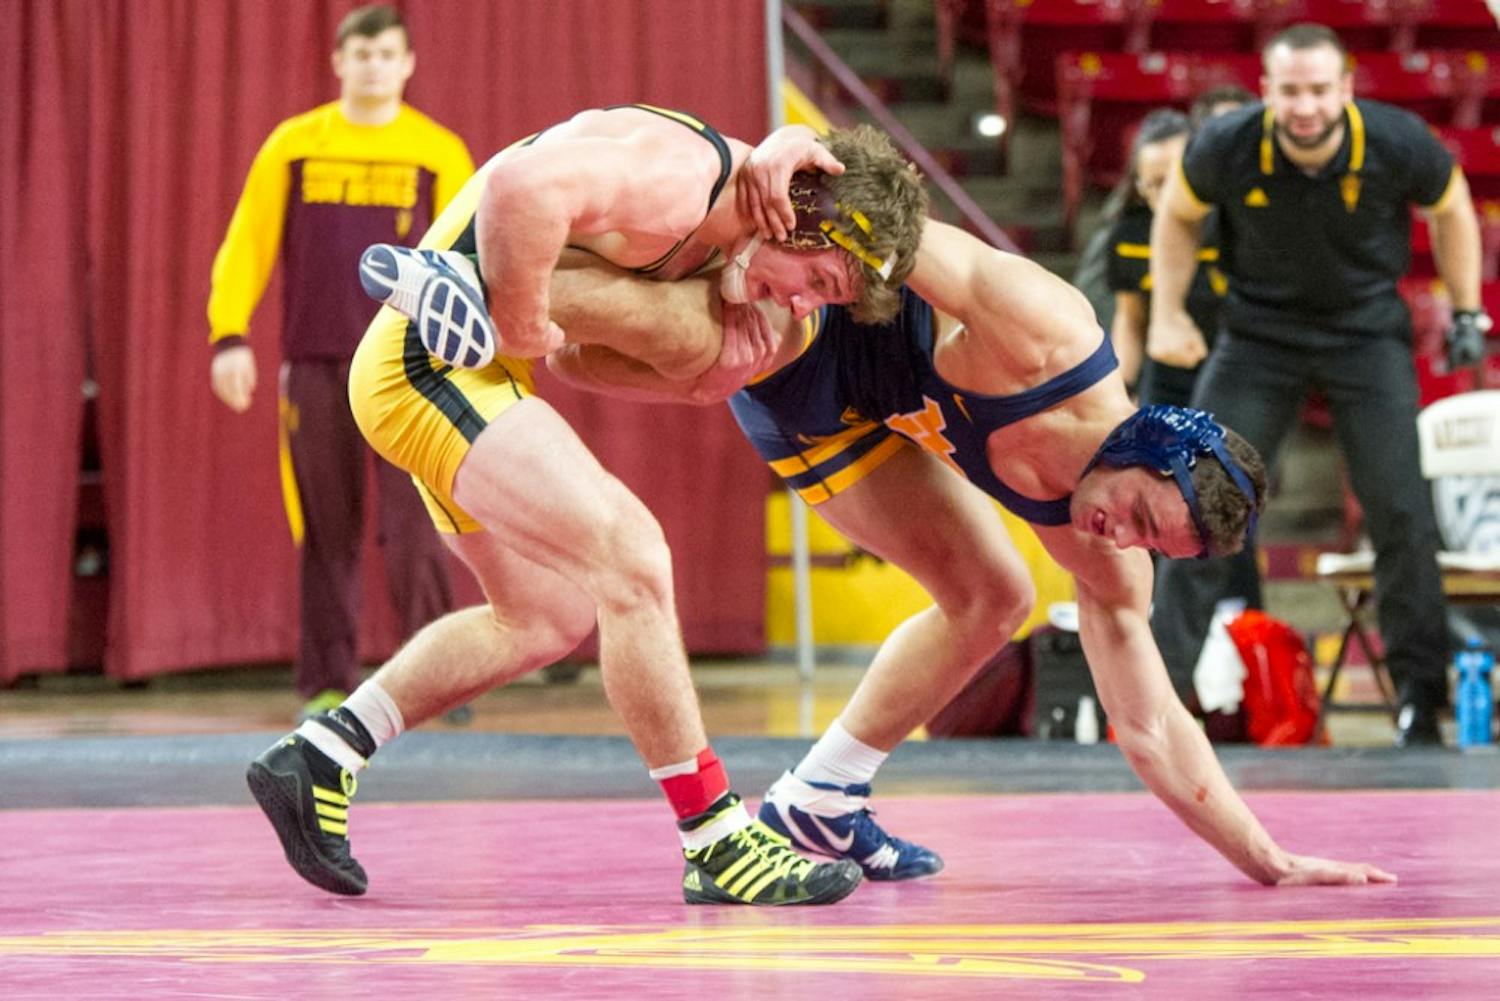 After four rounds of overtime, Jacen Peterson takes the match from WVU's Ross Renzi in a morning meet on Saturday, Jan. 23, 2016, at&nbsp; Wells Fargo Arena in Tempe, Arizona.